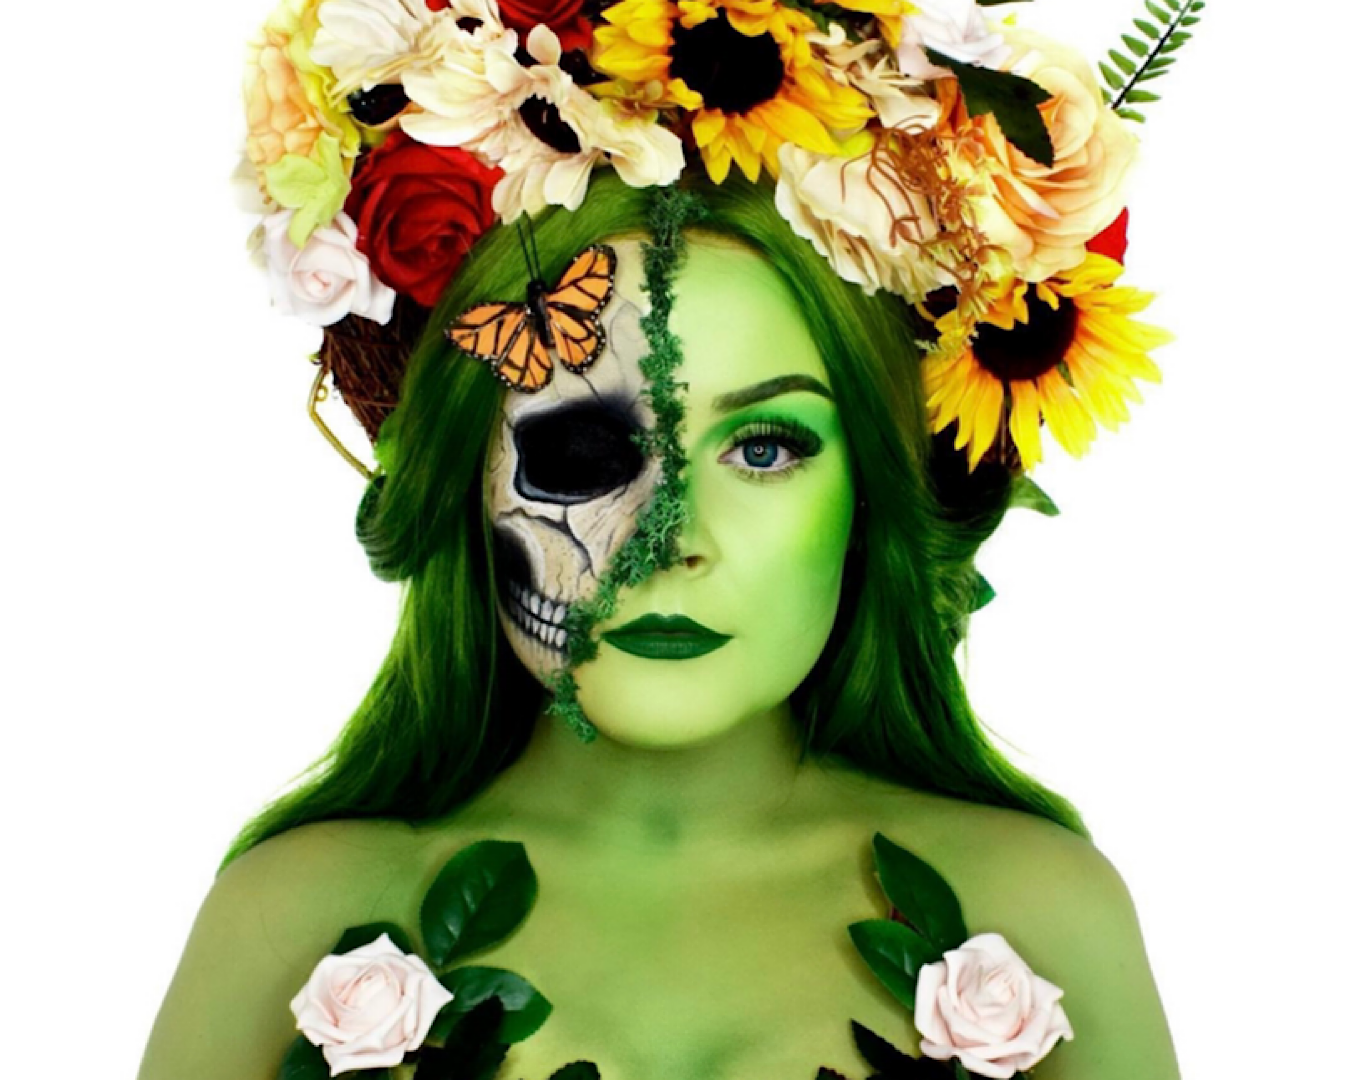 Makeup FX artist Ella Grimmant wears a floral headdress in a Mother Nature Halloween costume. Half her face is pretty green, earth mamma vibes and the other half is a skeleton. 